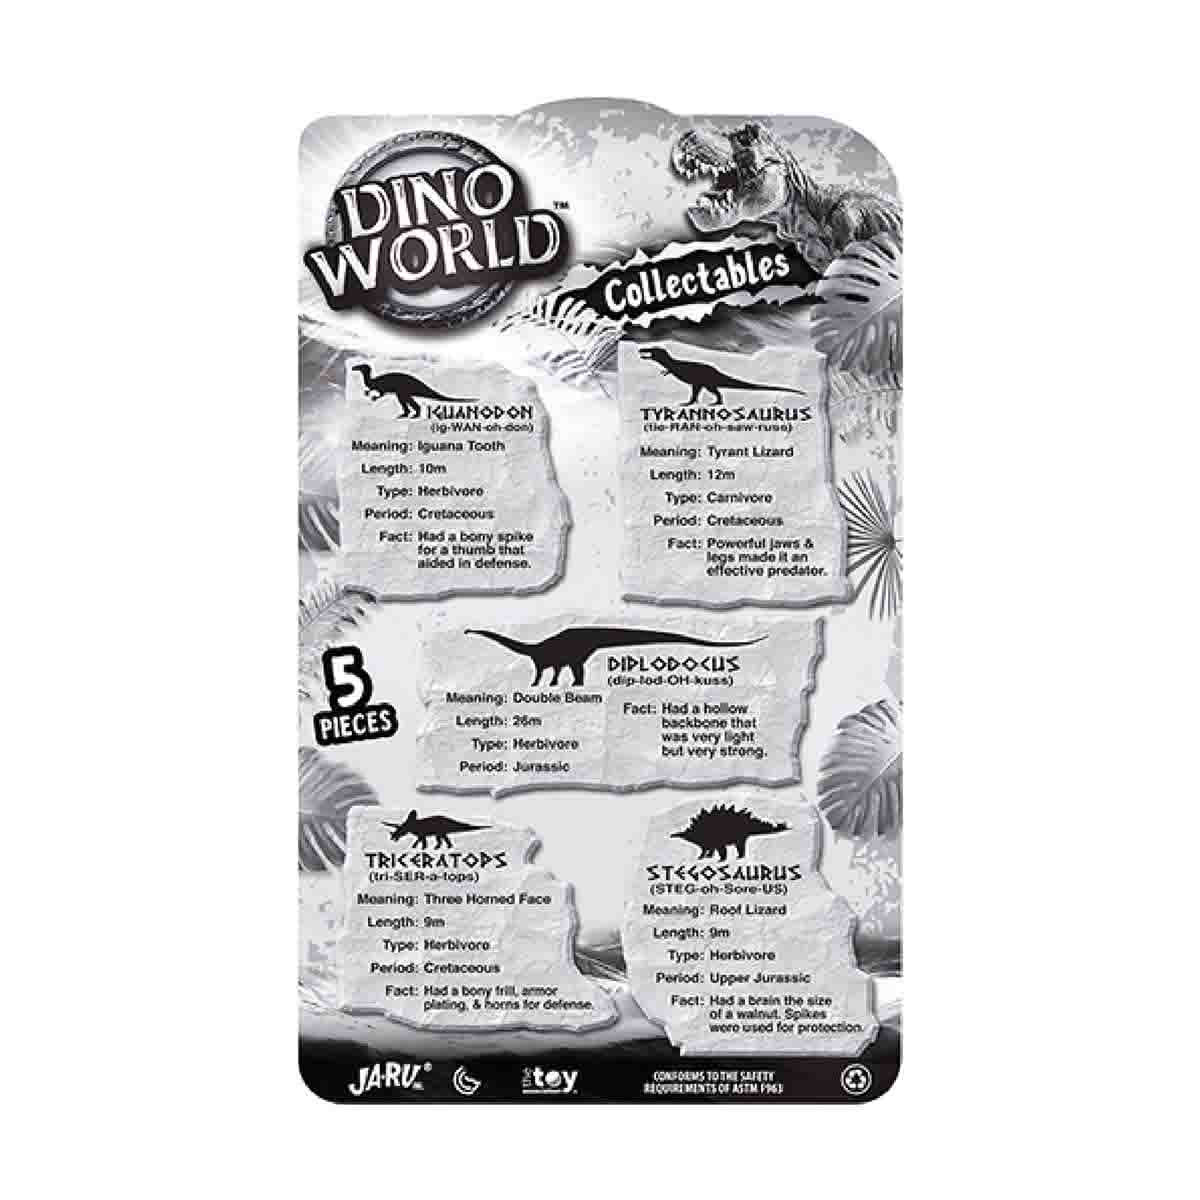 Dino World Collectibles Variety Pack, 5 Piece